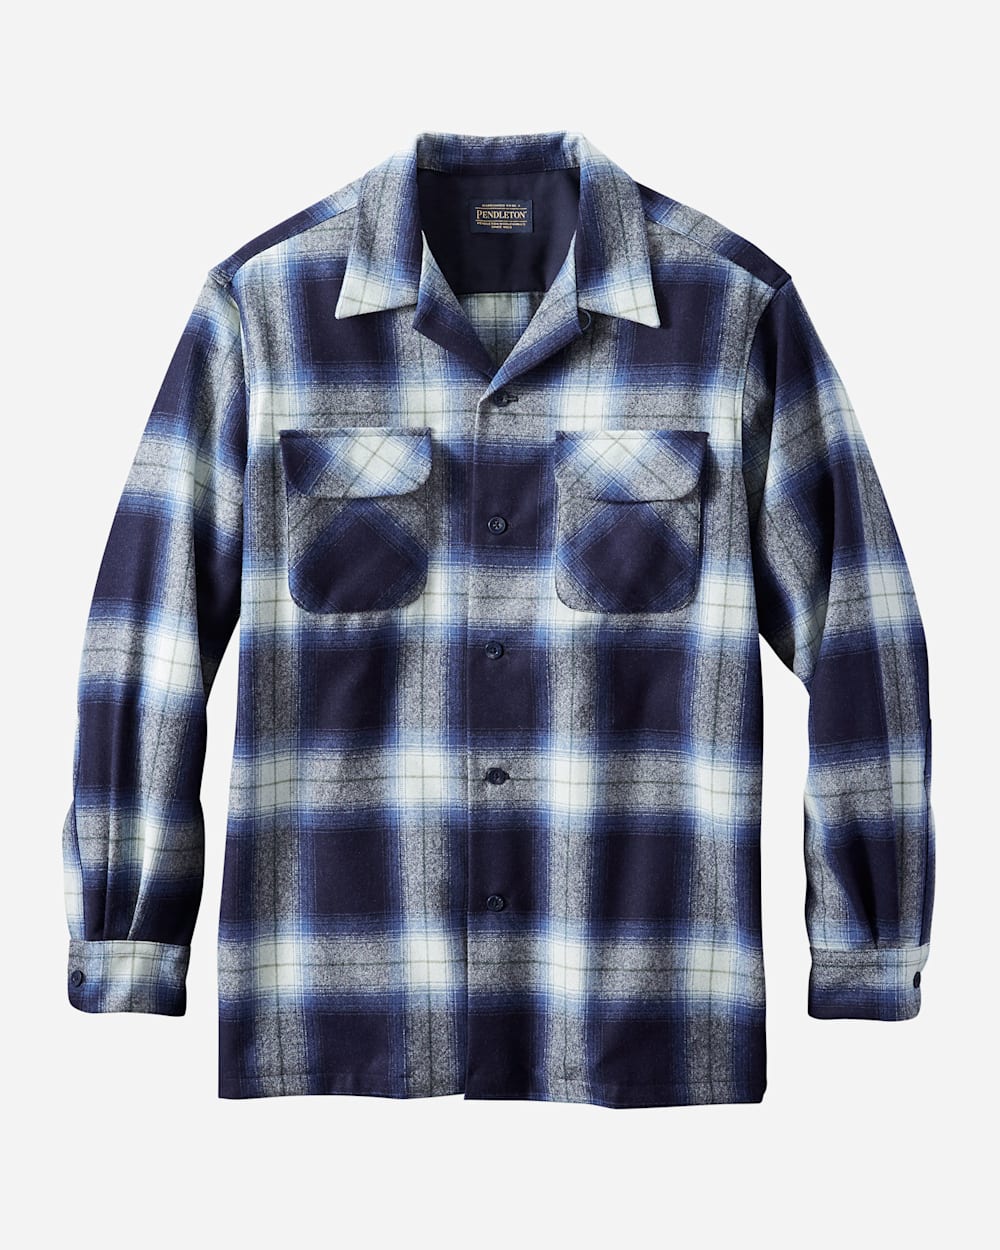 MEN'S BOARD SHIRT IN NAVY/BRIGHT BLUE PLAID image number 1